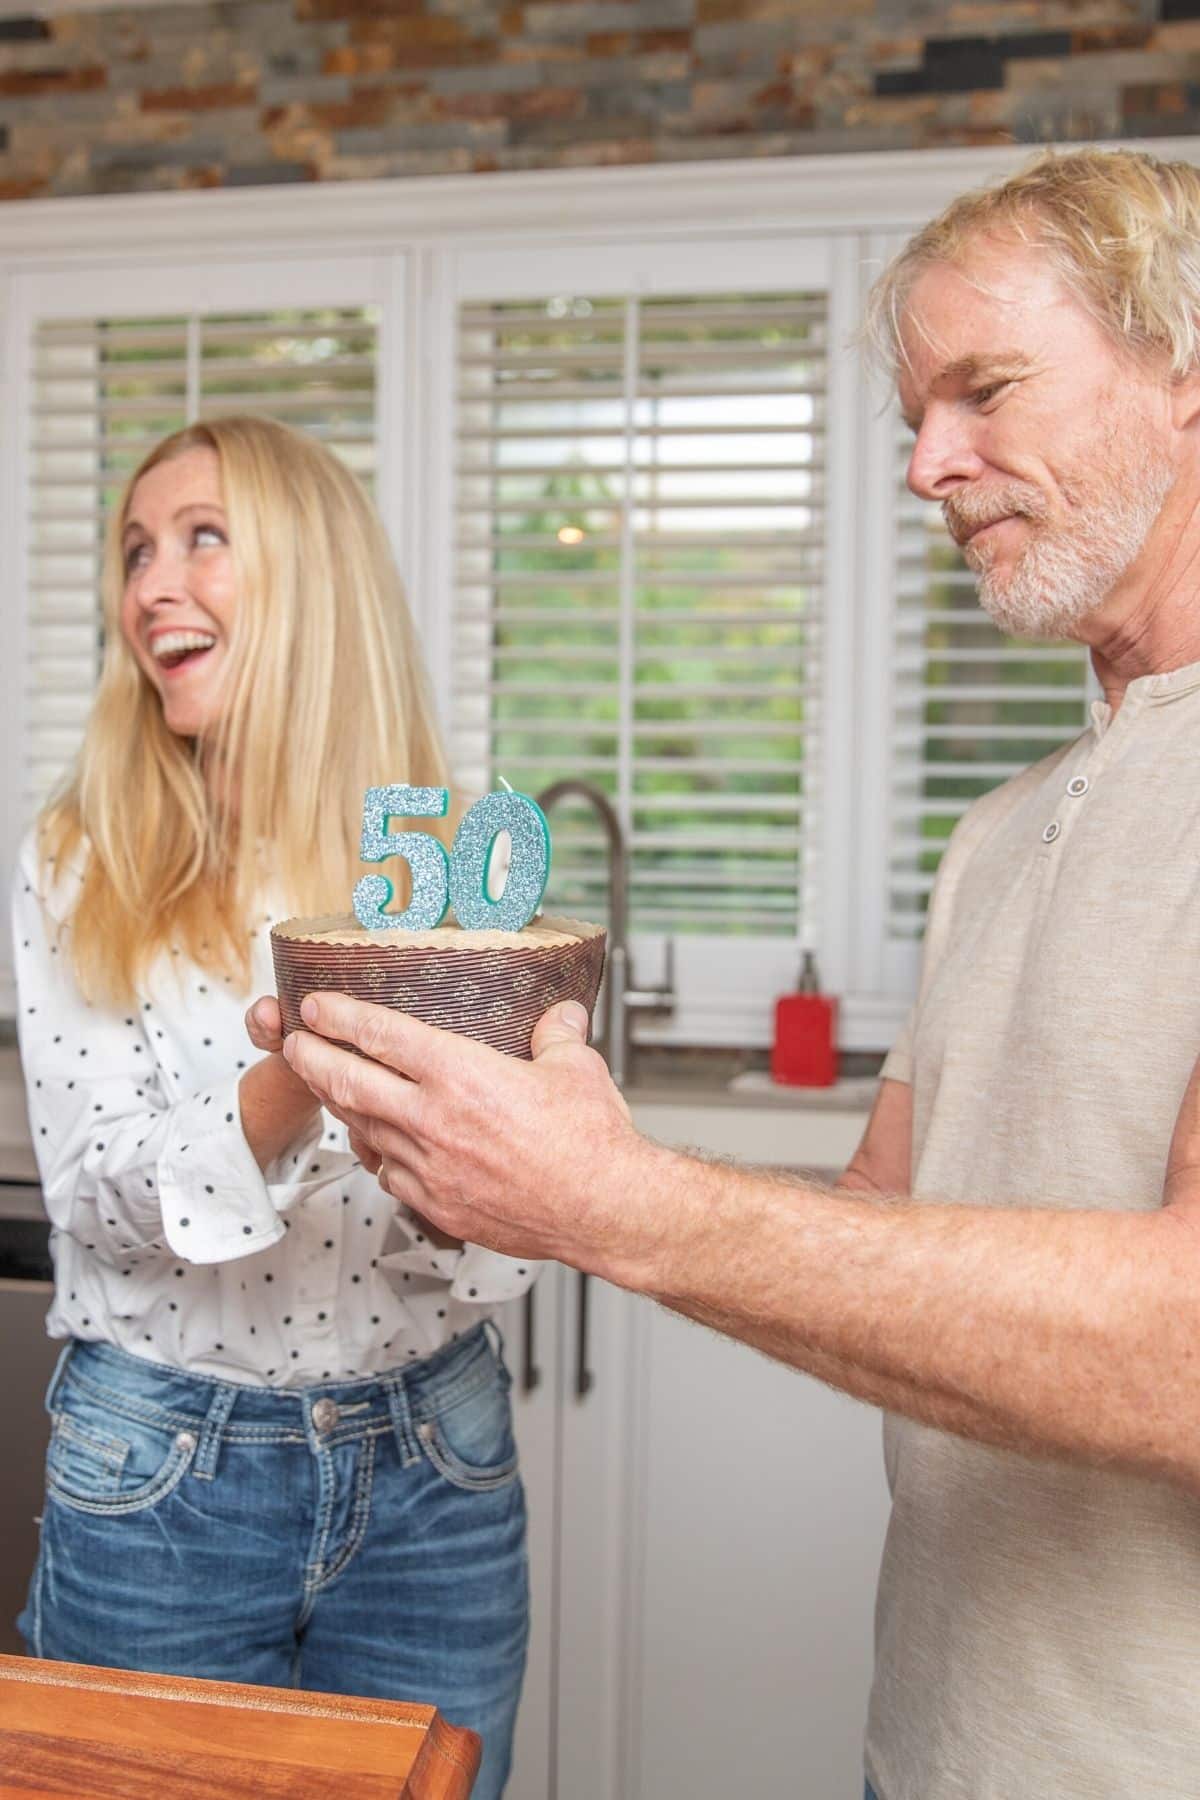 woman holding a cake with 50 on it.